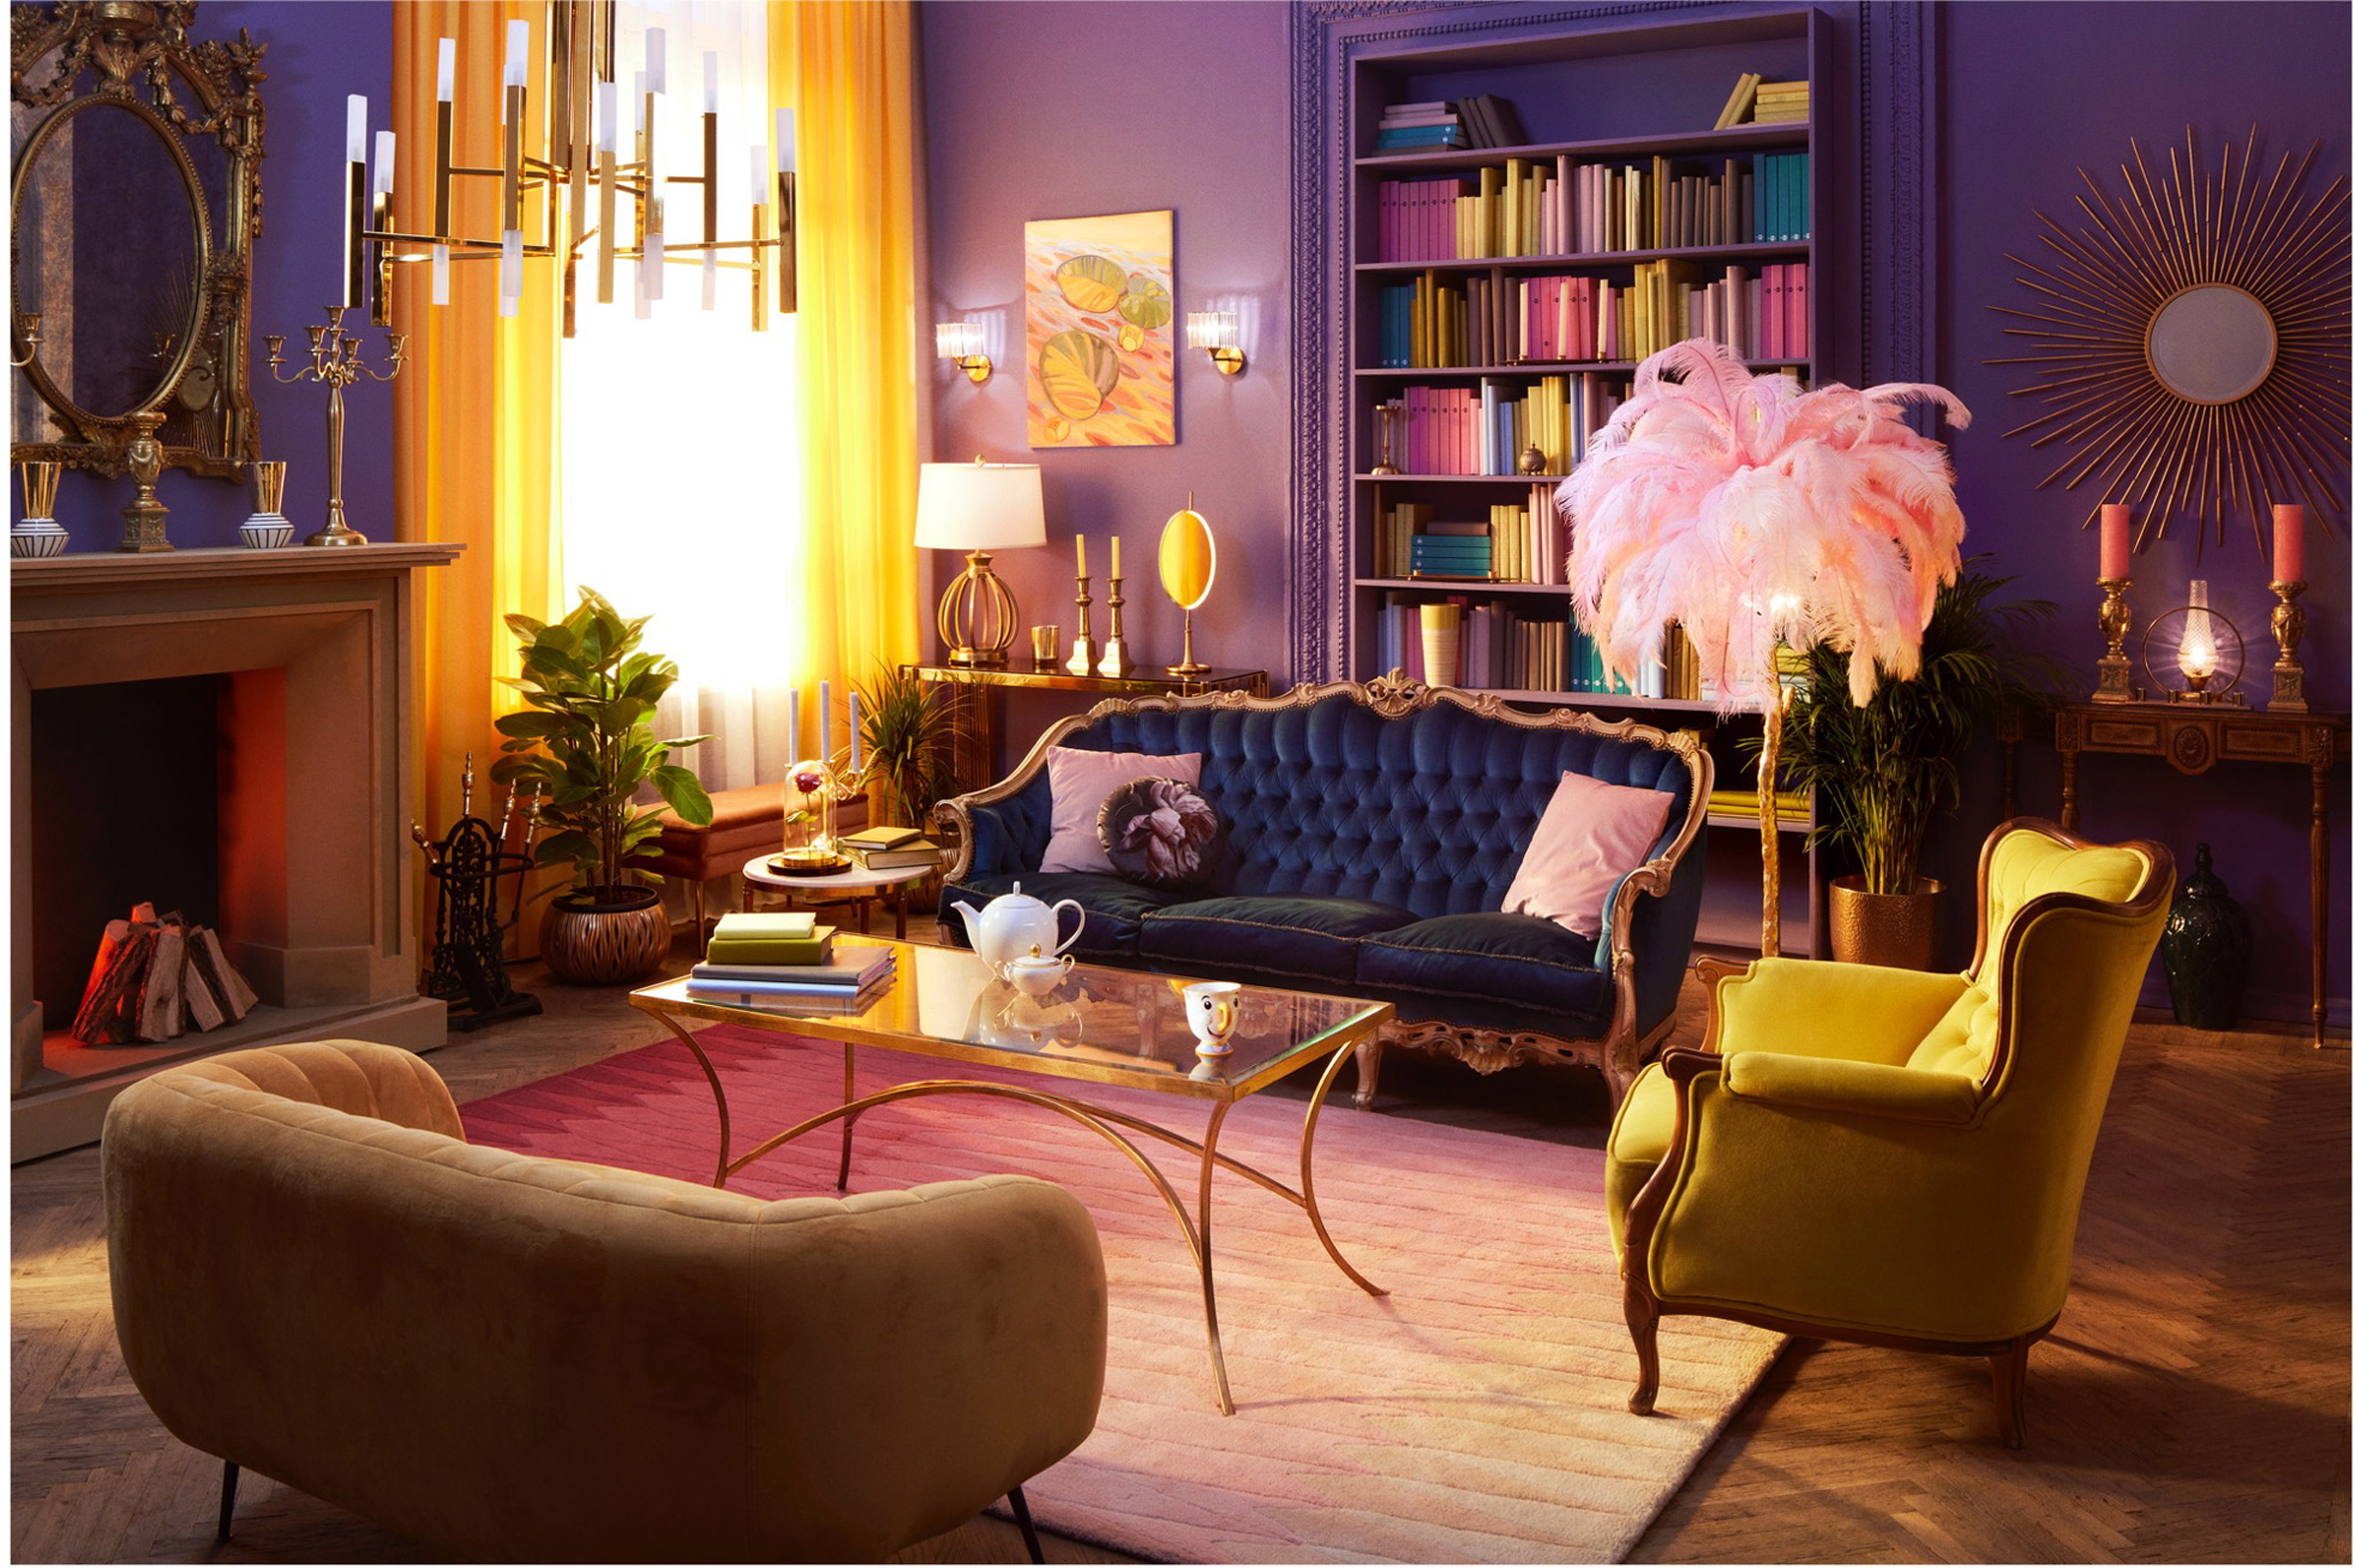 Disney moves into aspirational furniture with new brand Disney Home